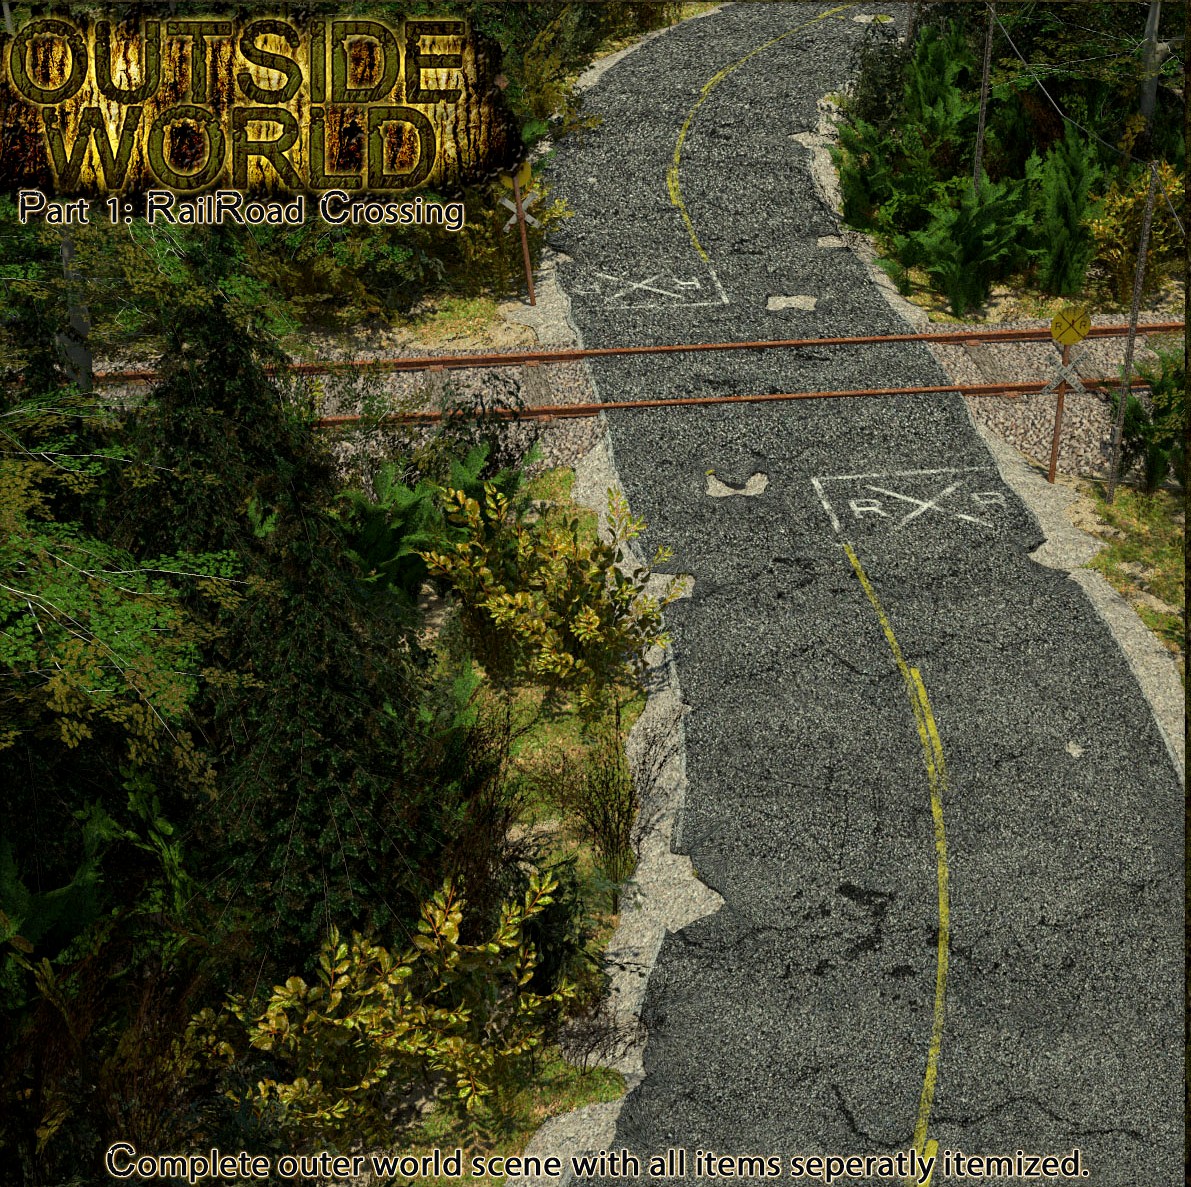 Outside World: Part1 - Railroad Crossing Extended License